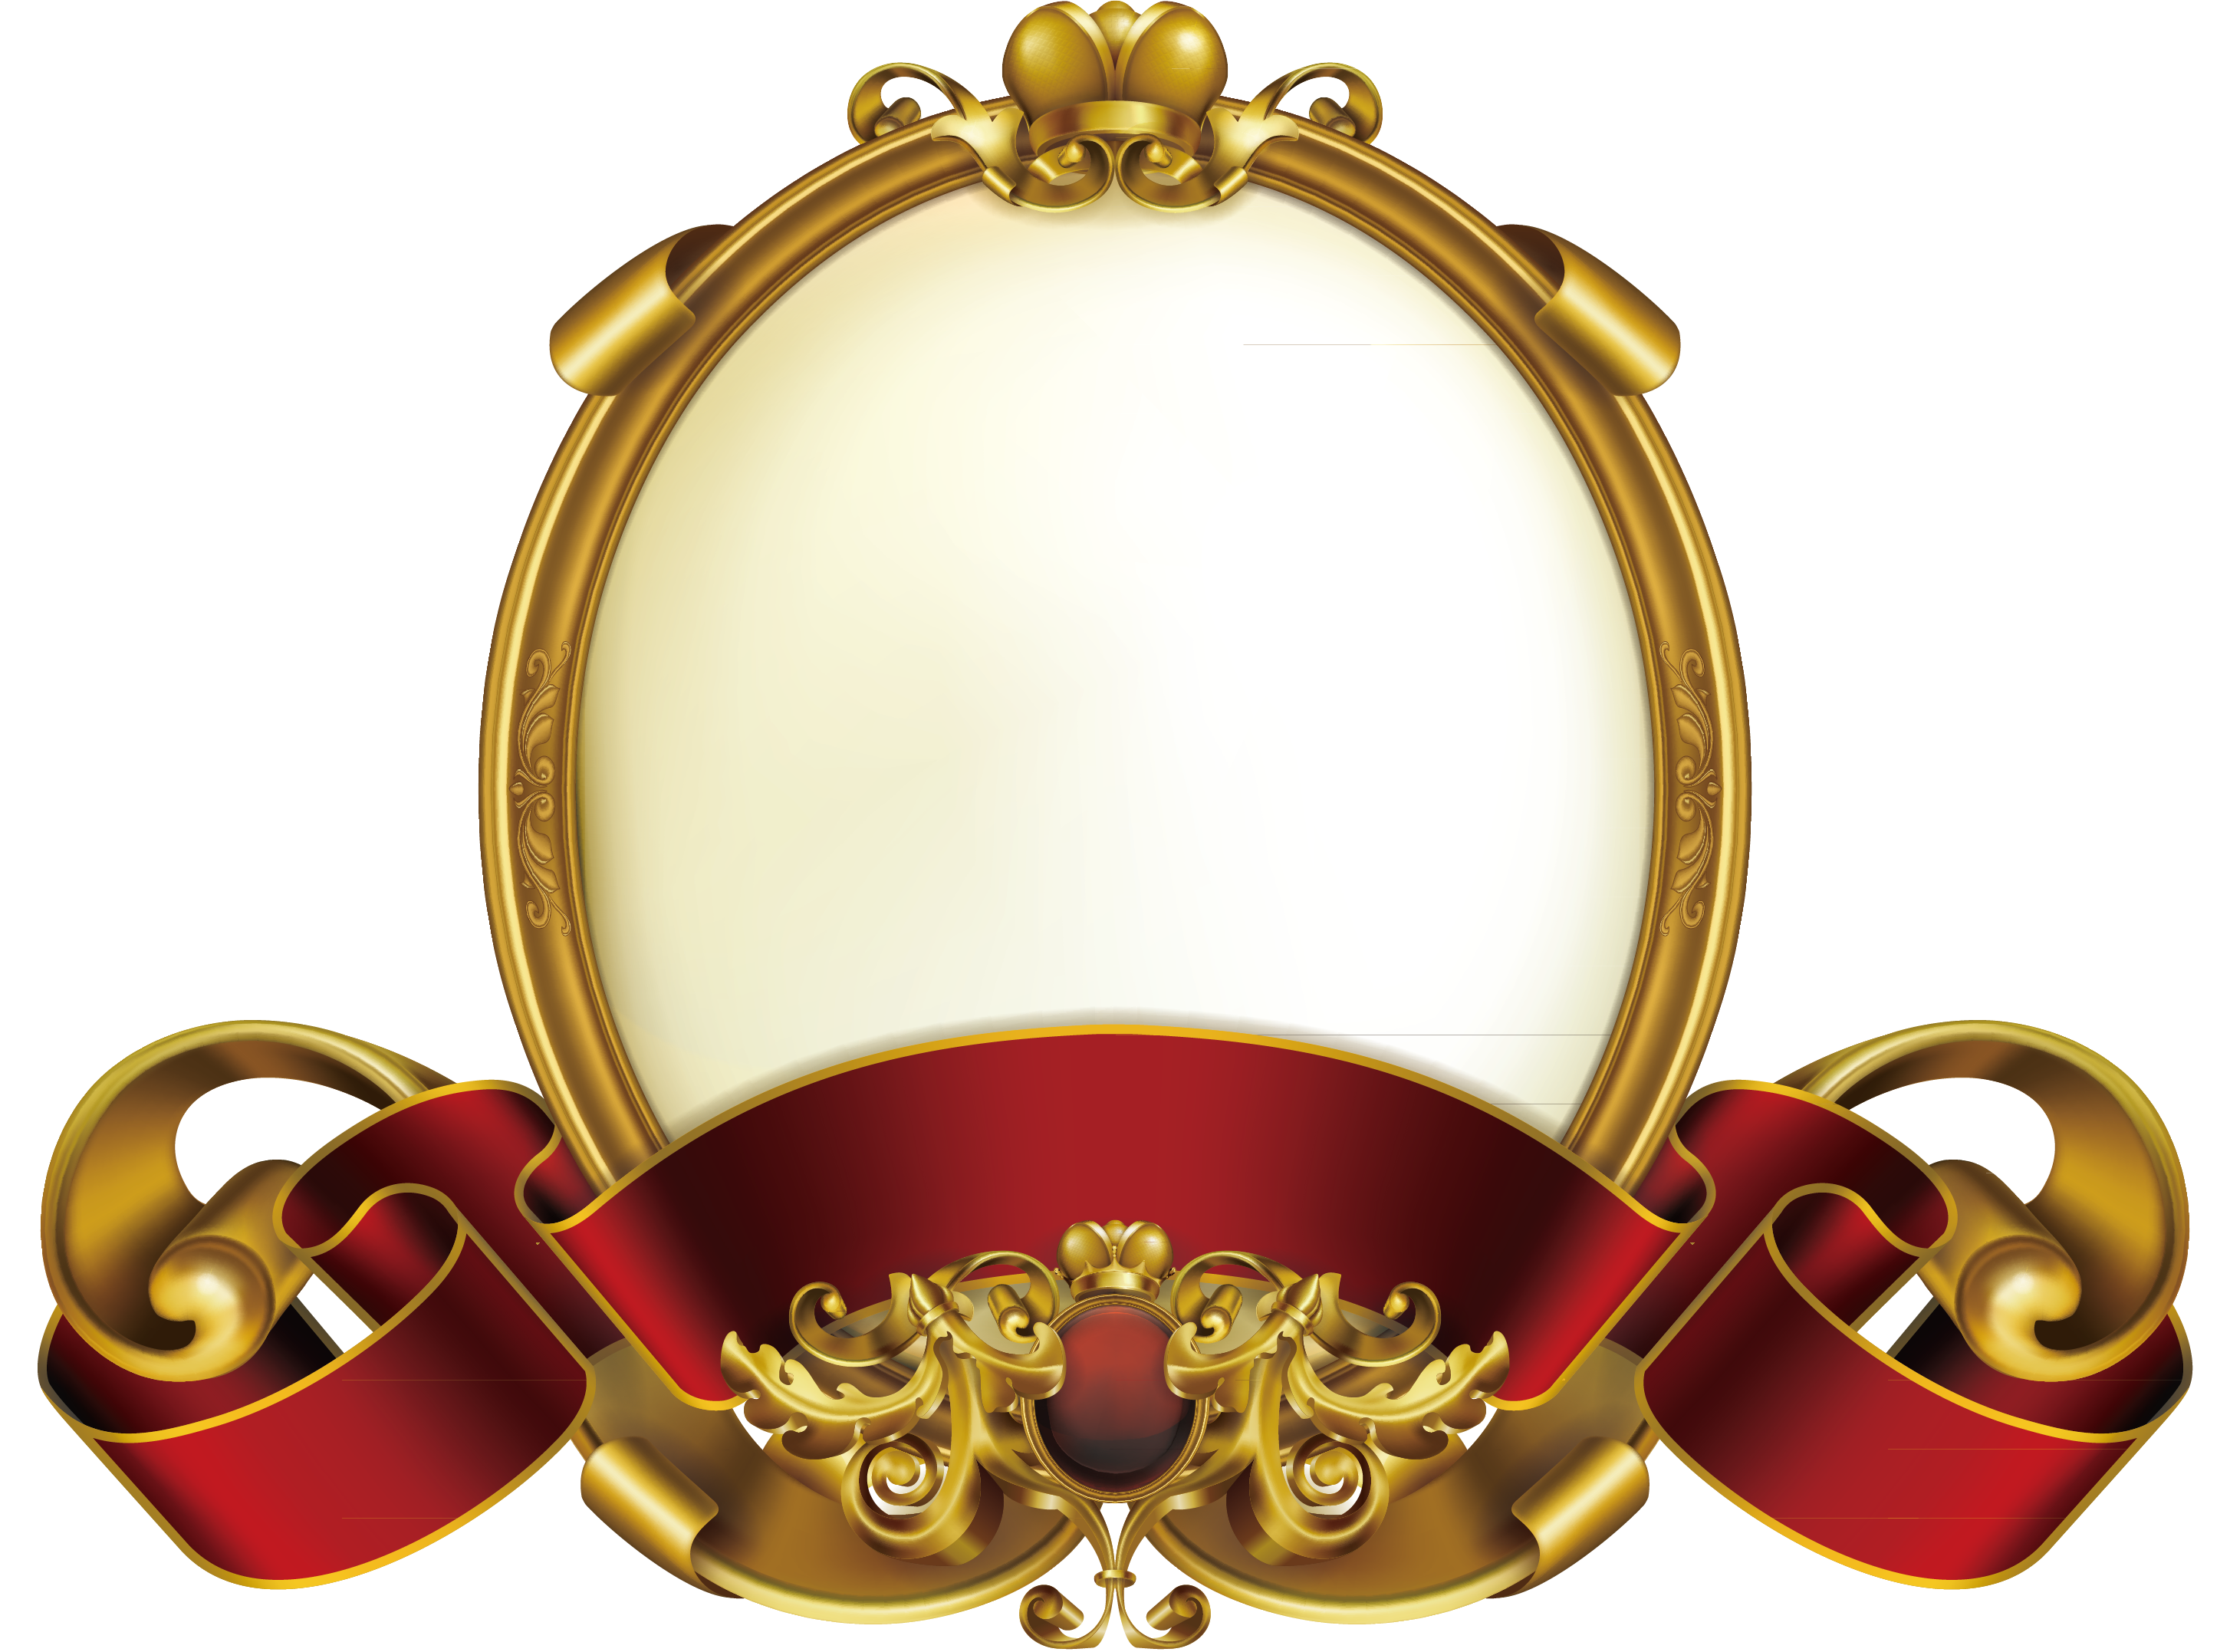 Europe Picture And United Shield Vintage Frame Clipart